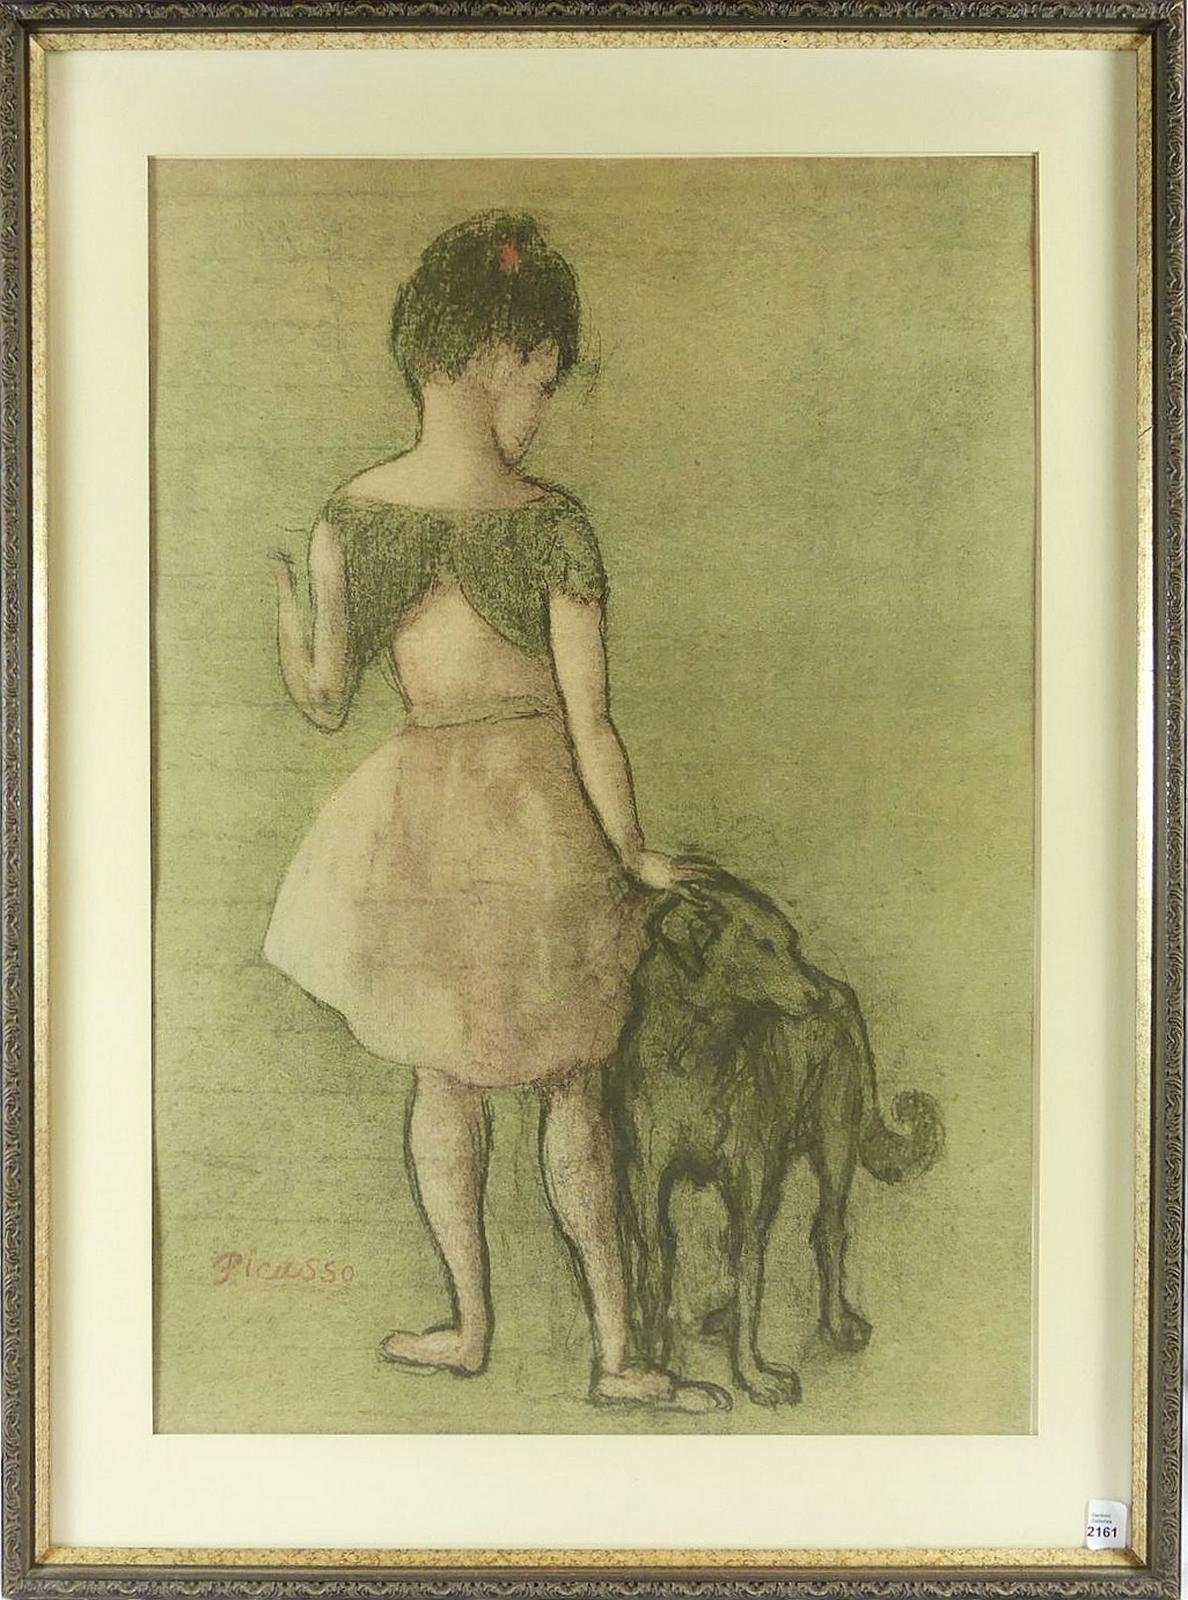 Little Girl and Dog by Pablo Picasso, 1905